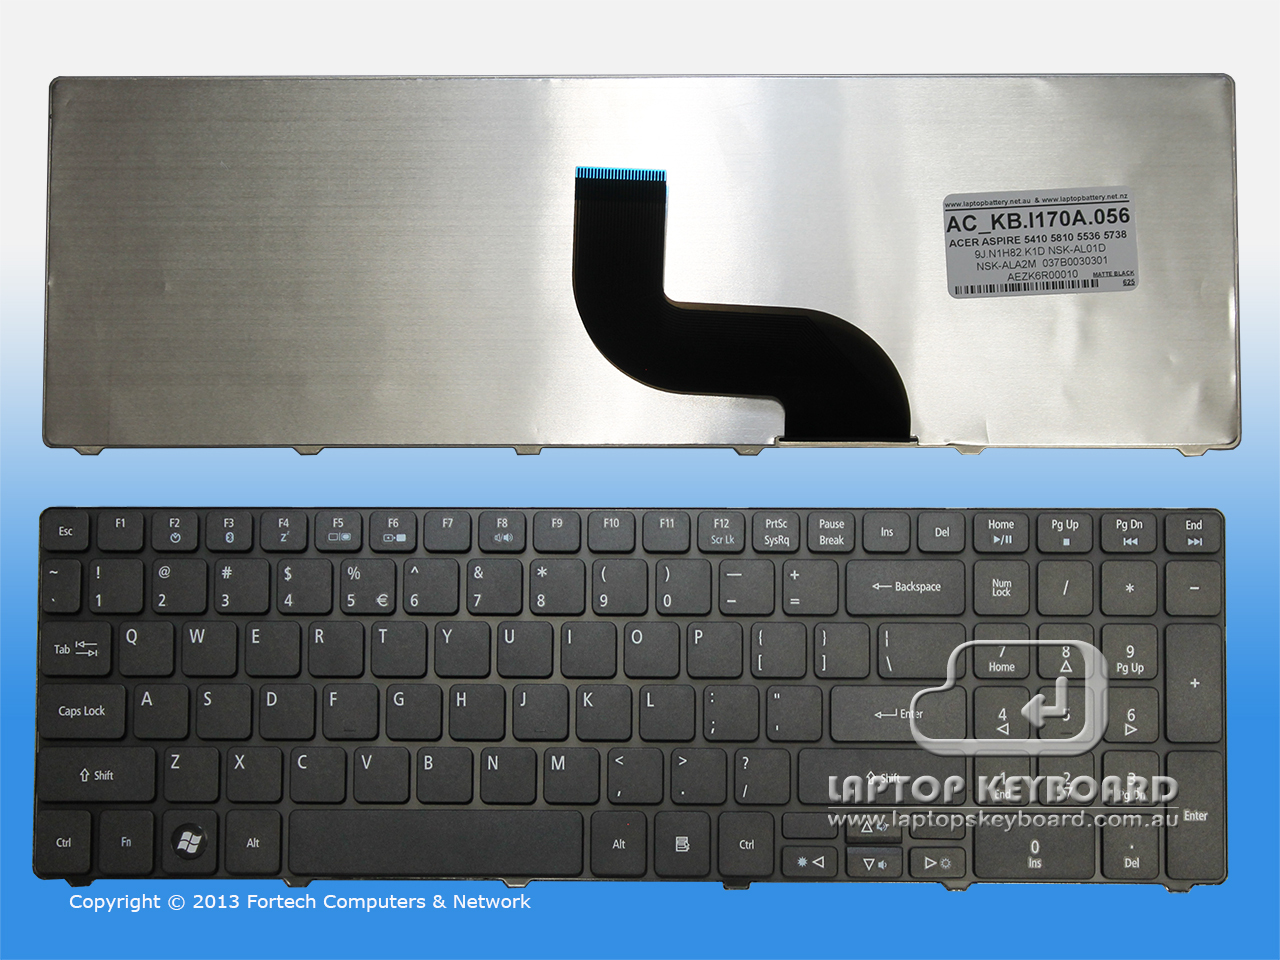 ACER ASPIRE 5410, 5810, 5536, 5738 REPLACE KEYBOARD KB.I170A.056 - Click Image to Close